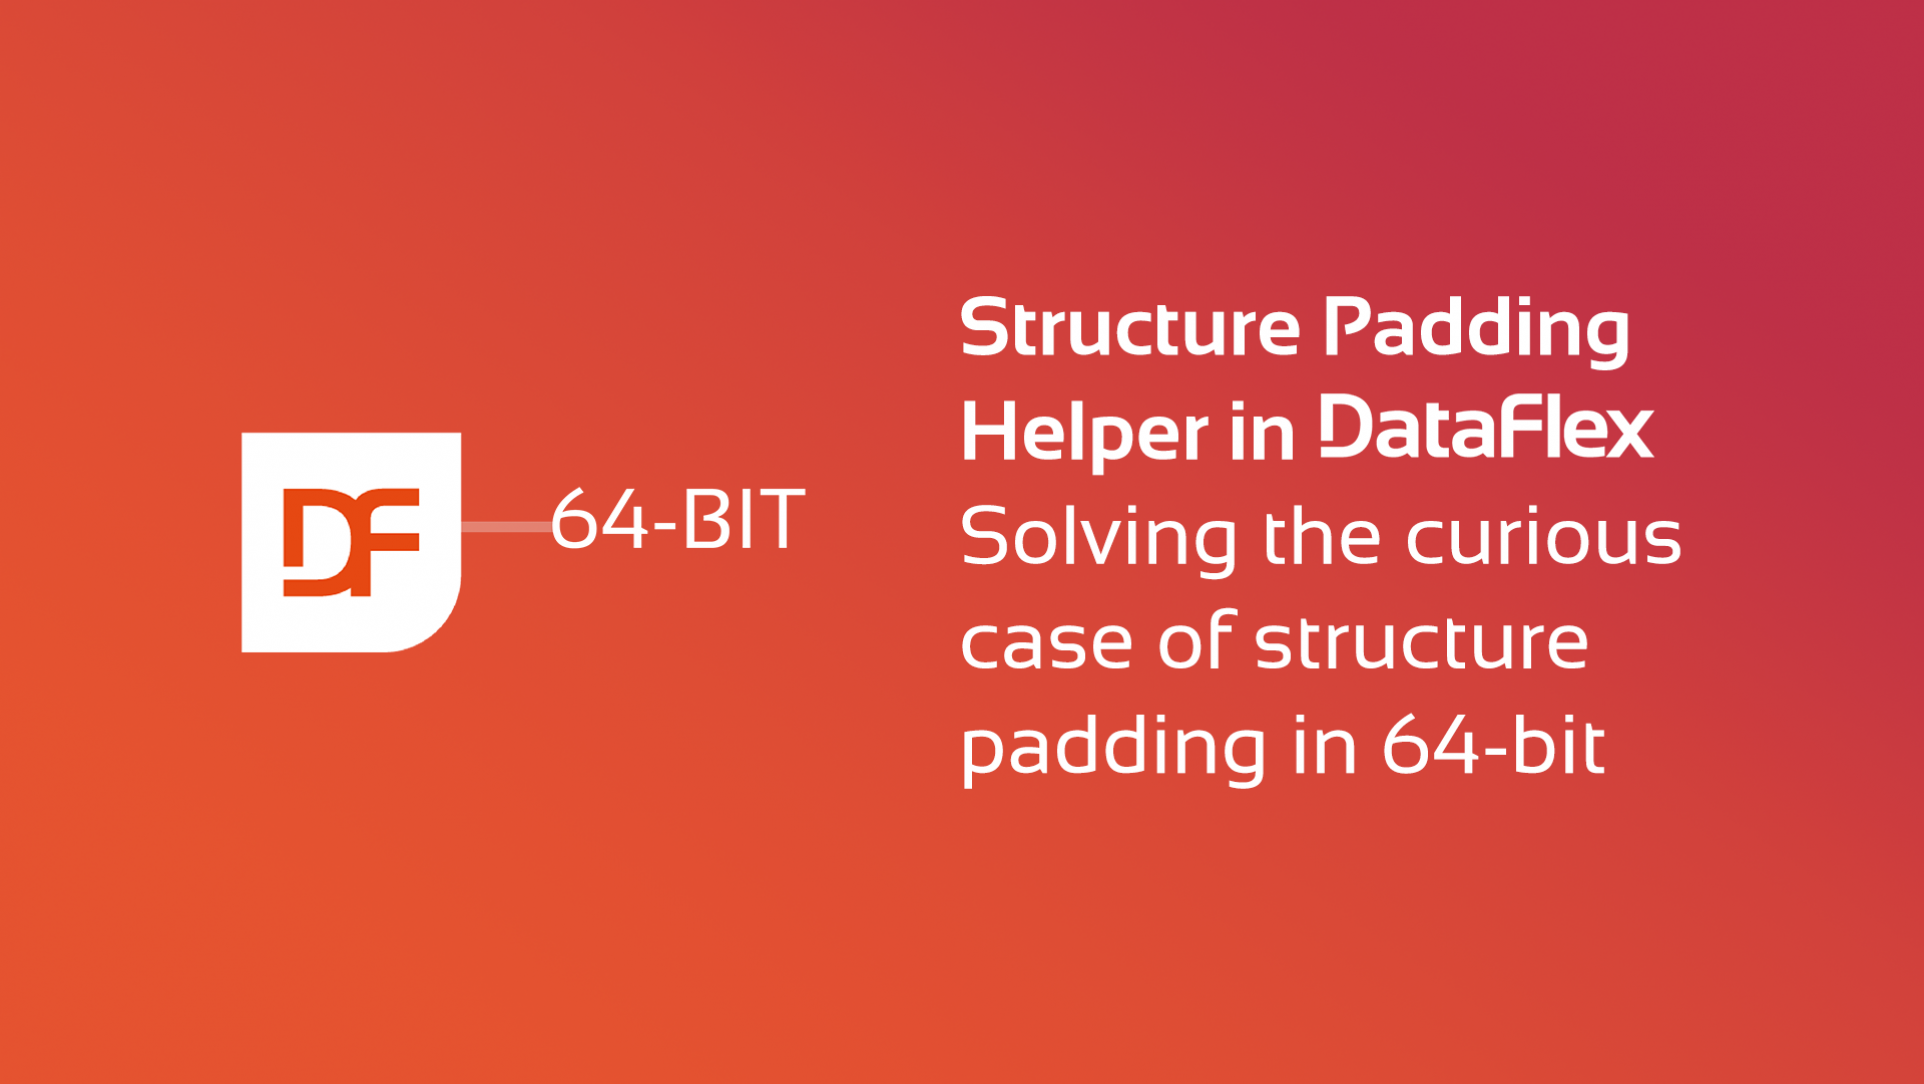 Structure Padding Helper tool eases migrating your DataFlex applications to 64-bit